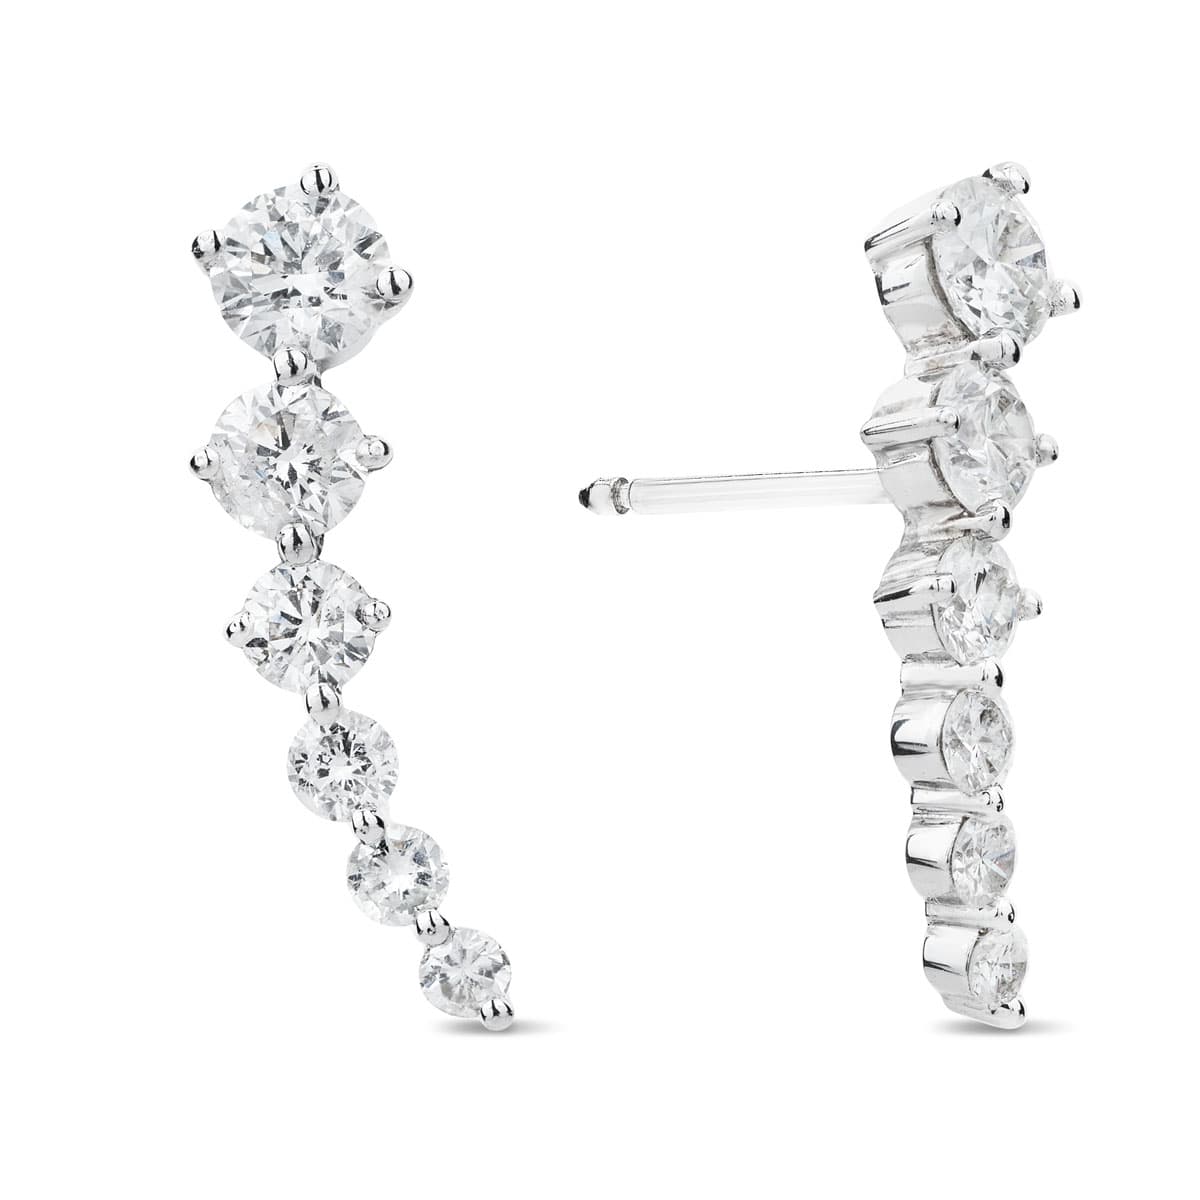 18ct white gold ear climber earrings set with 12 round brilliant cut diamonds G VS quality with total weight of 0.85ct